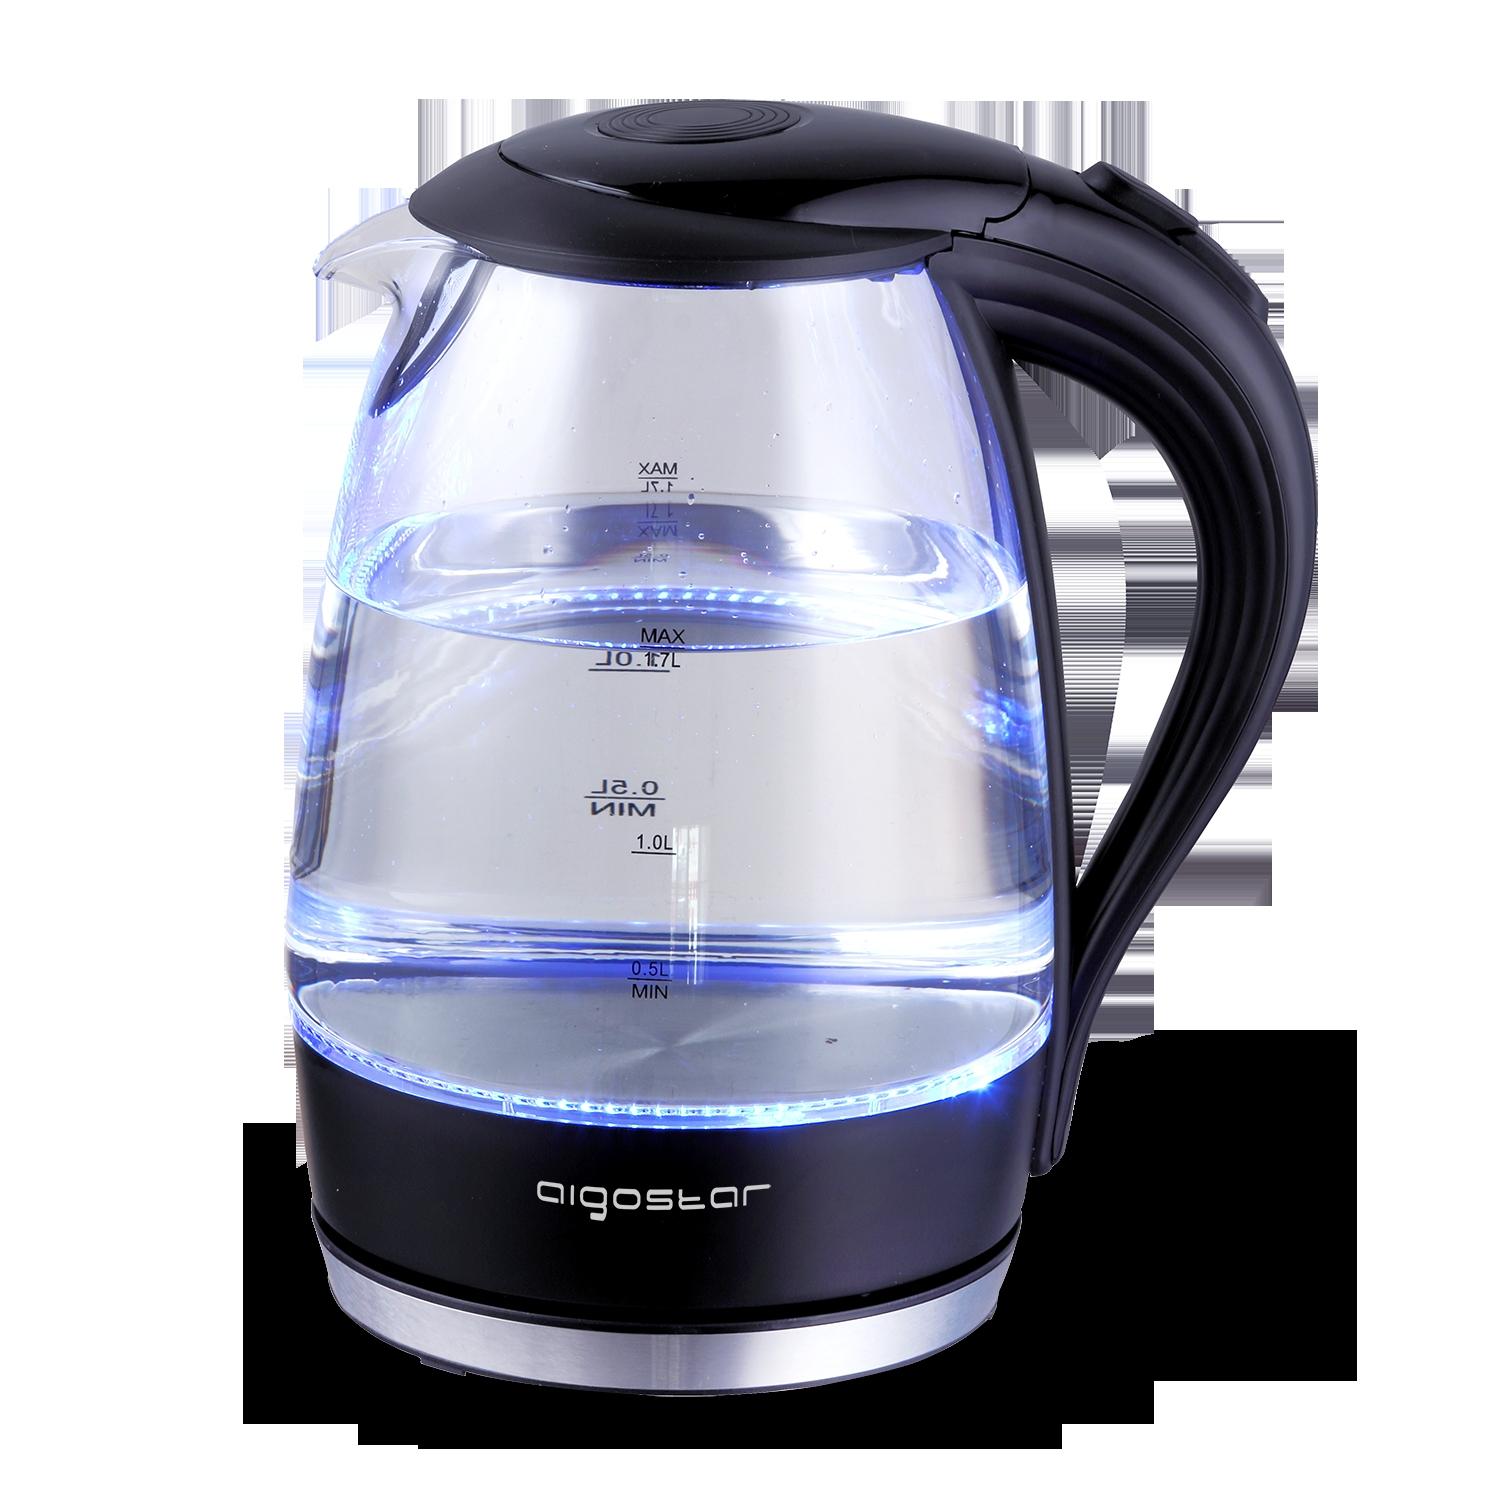 1850-2200W Electric Kettles